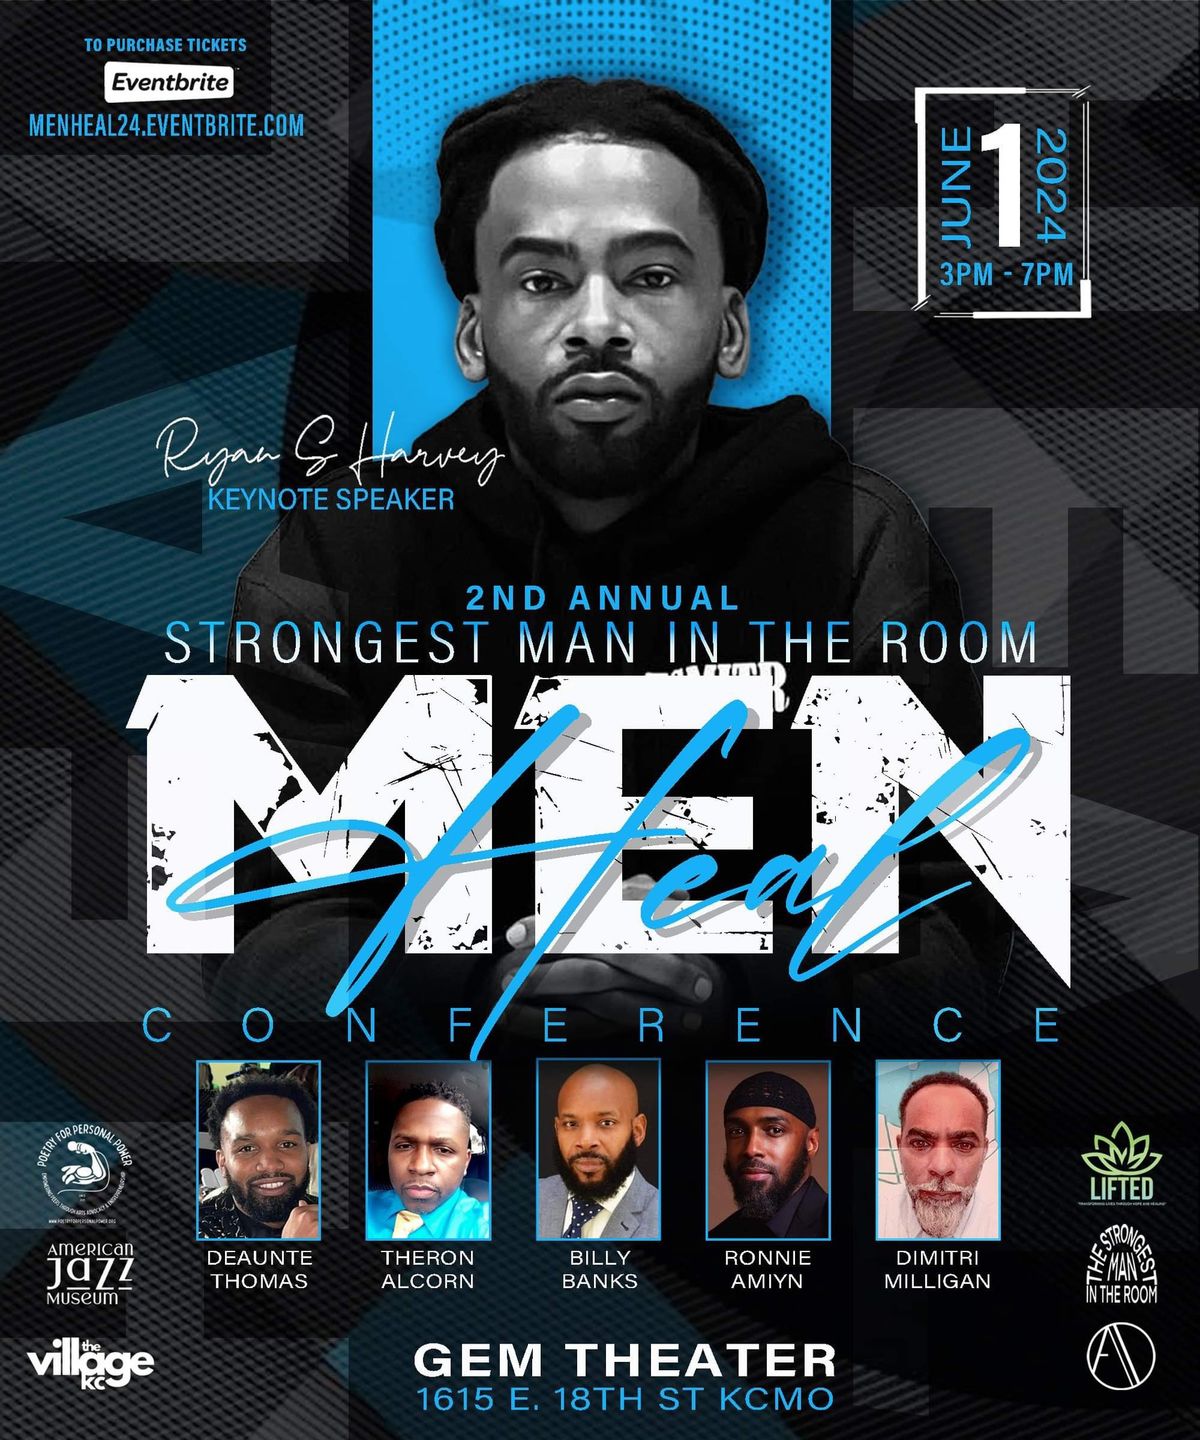 2nd Annual Strongest Man In The Room: Men Heal Conference